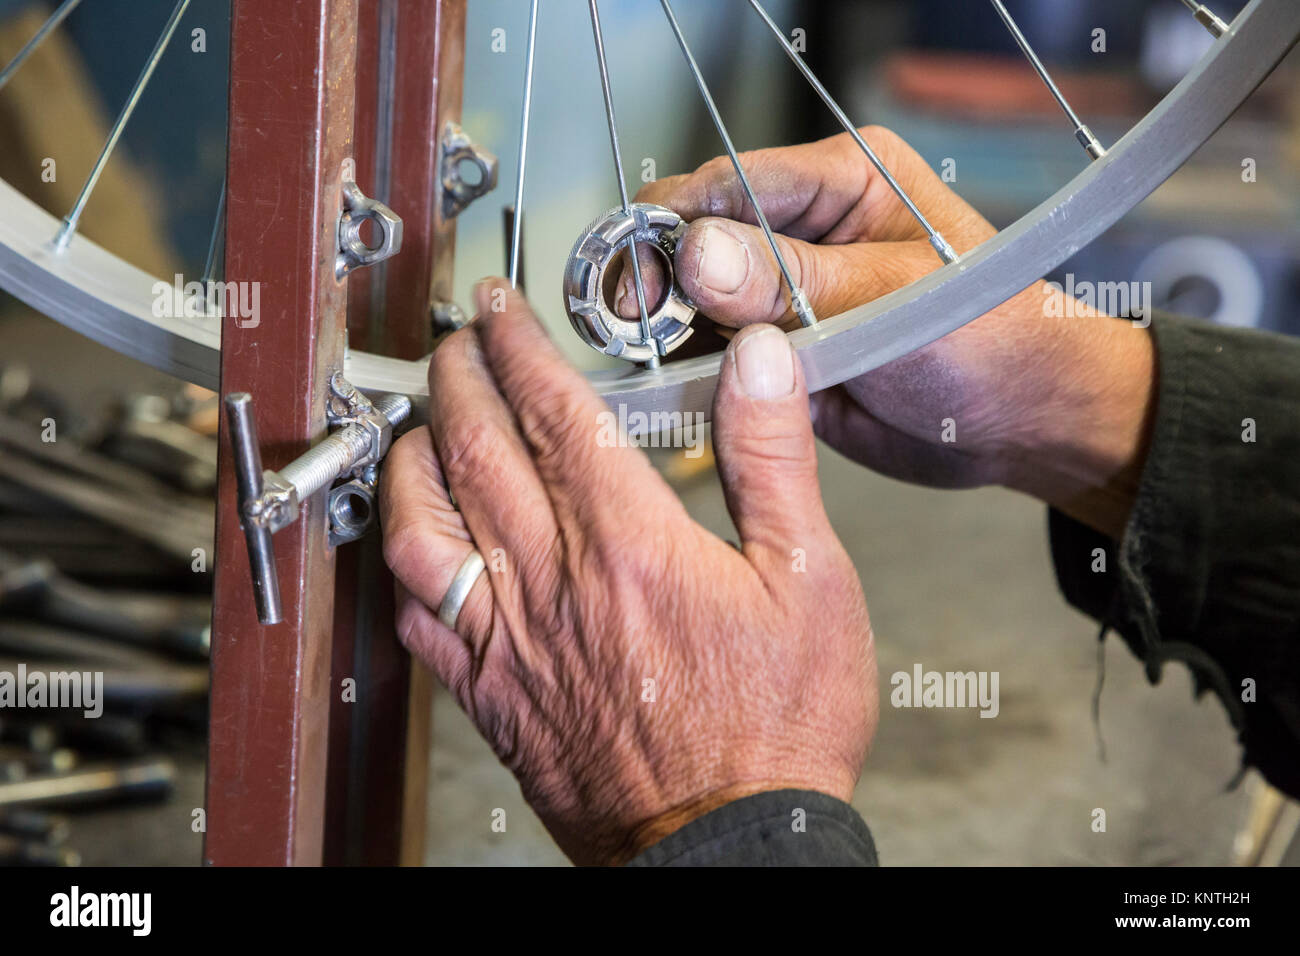 Nogales, Sonora, Mexico - ARSOBO, a nonprofit workshop, hires workers with disabilities to make wheelchairs, prosthetics, and hearing aids for low-inc Stock Photo